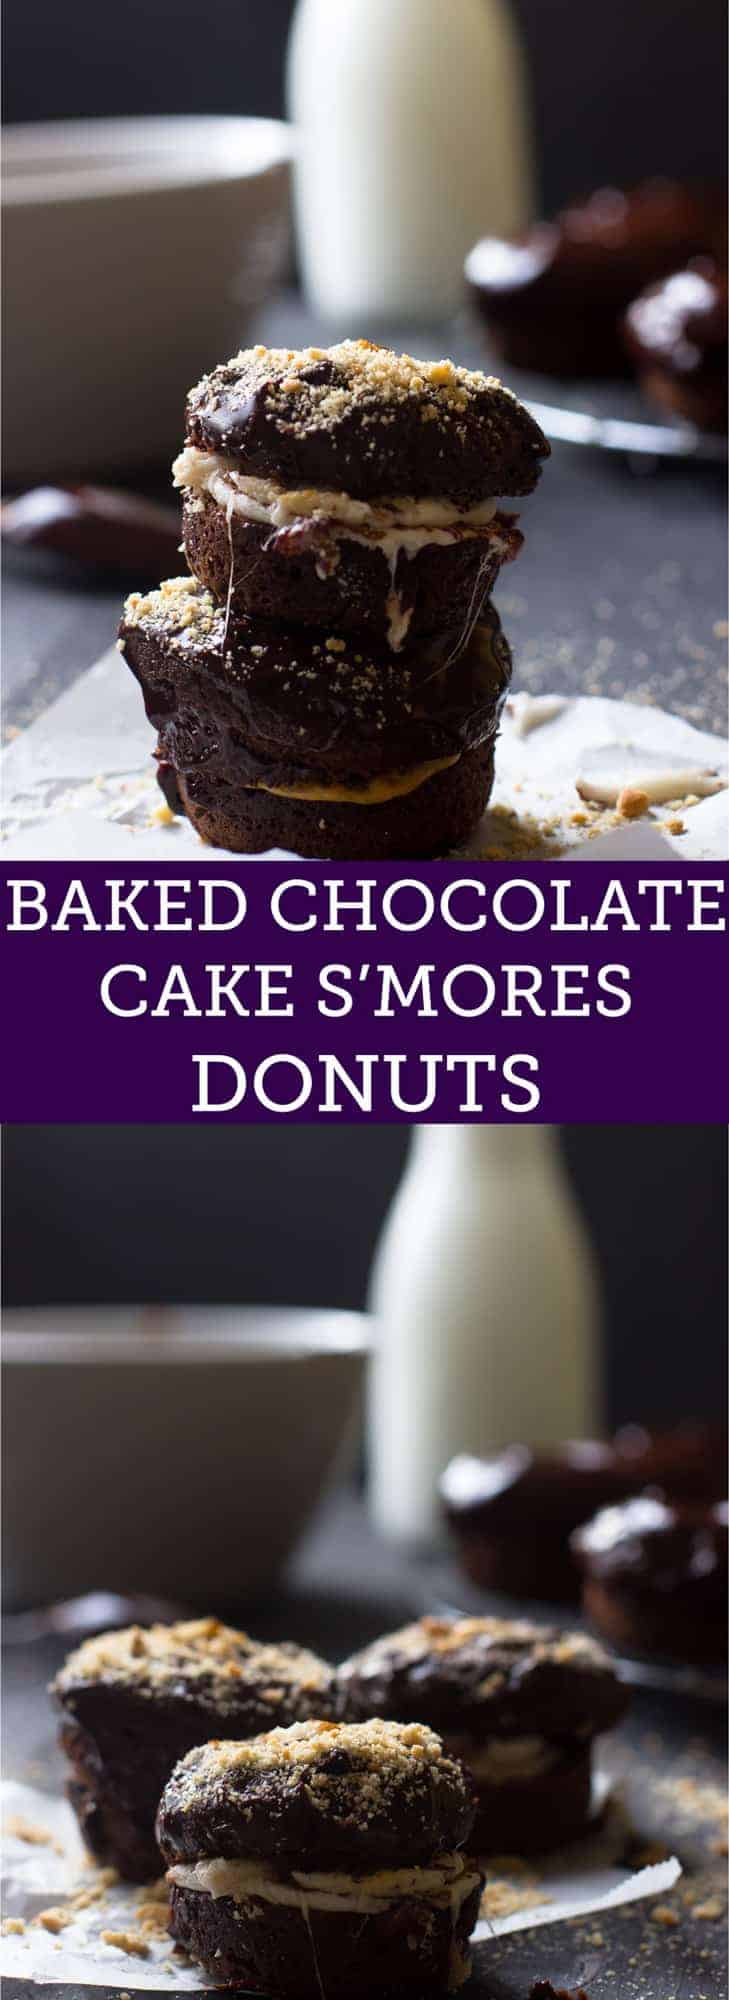 These Baked Chocolate Cake S'mores Donuts are a delicious gluten free chocolate donut sandwich with a toasted melty marshmallow and topped with a delicious chocolate glaze.